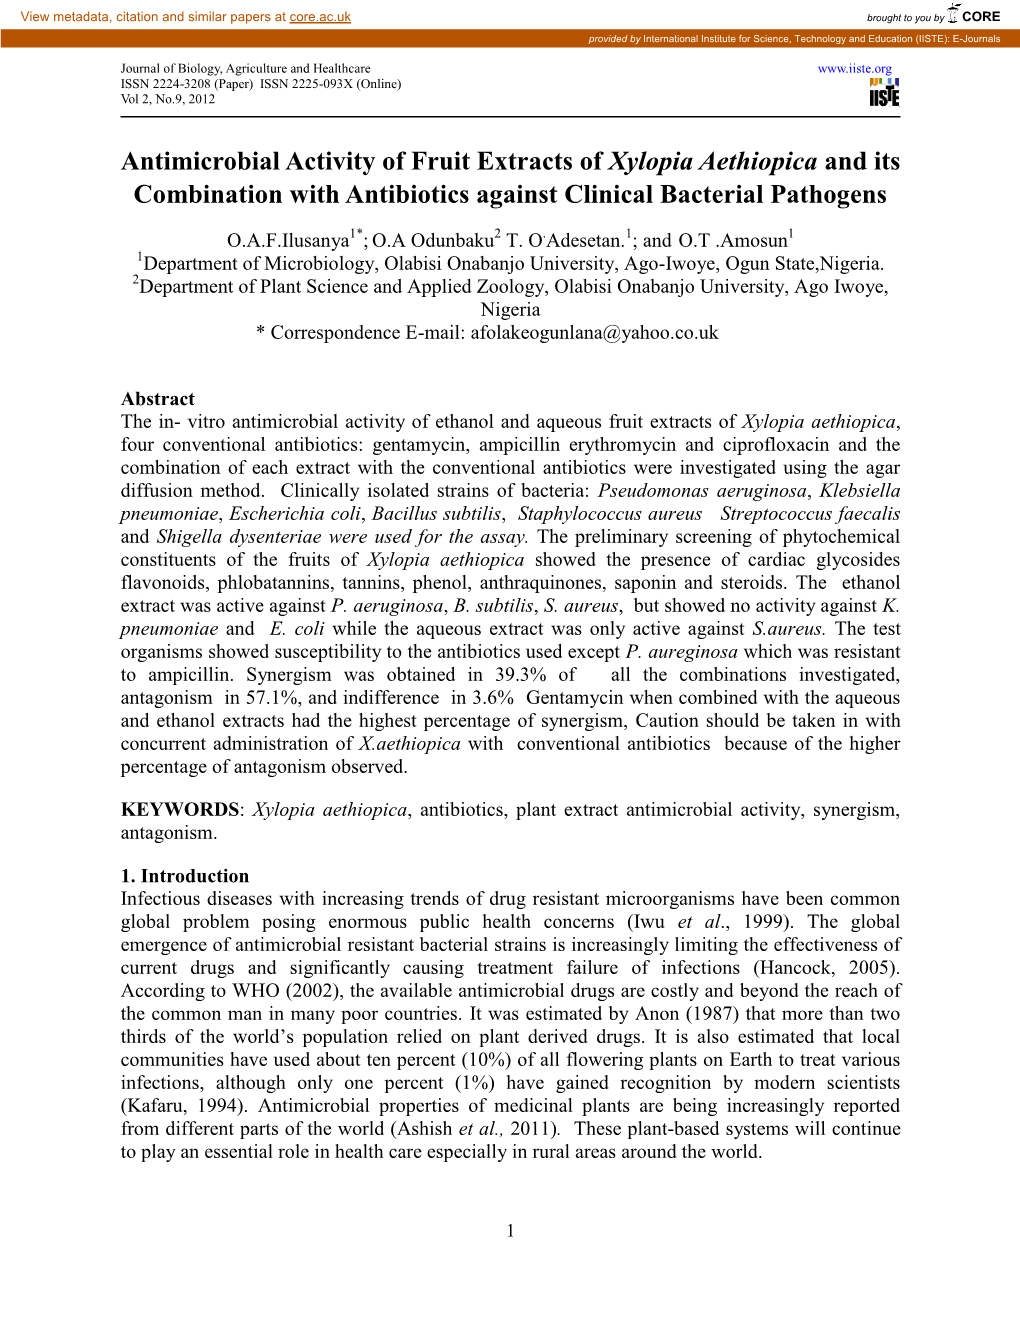 Antimicrobial Activity of Fruit Extracts of Xylopia Aethiopica and Its Combination with Antibiotics Against Clinical Bacterial Pathogens